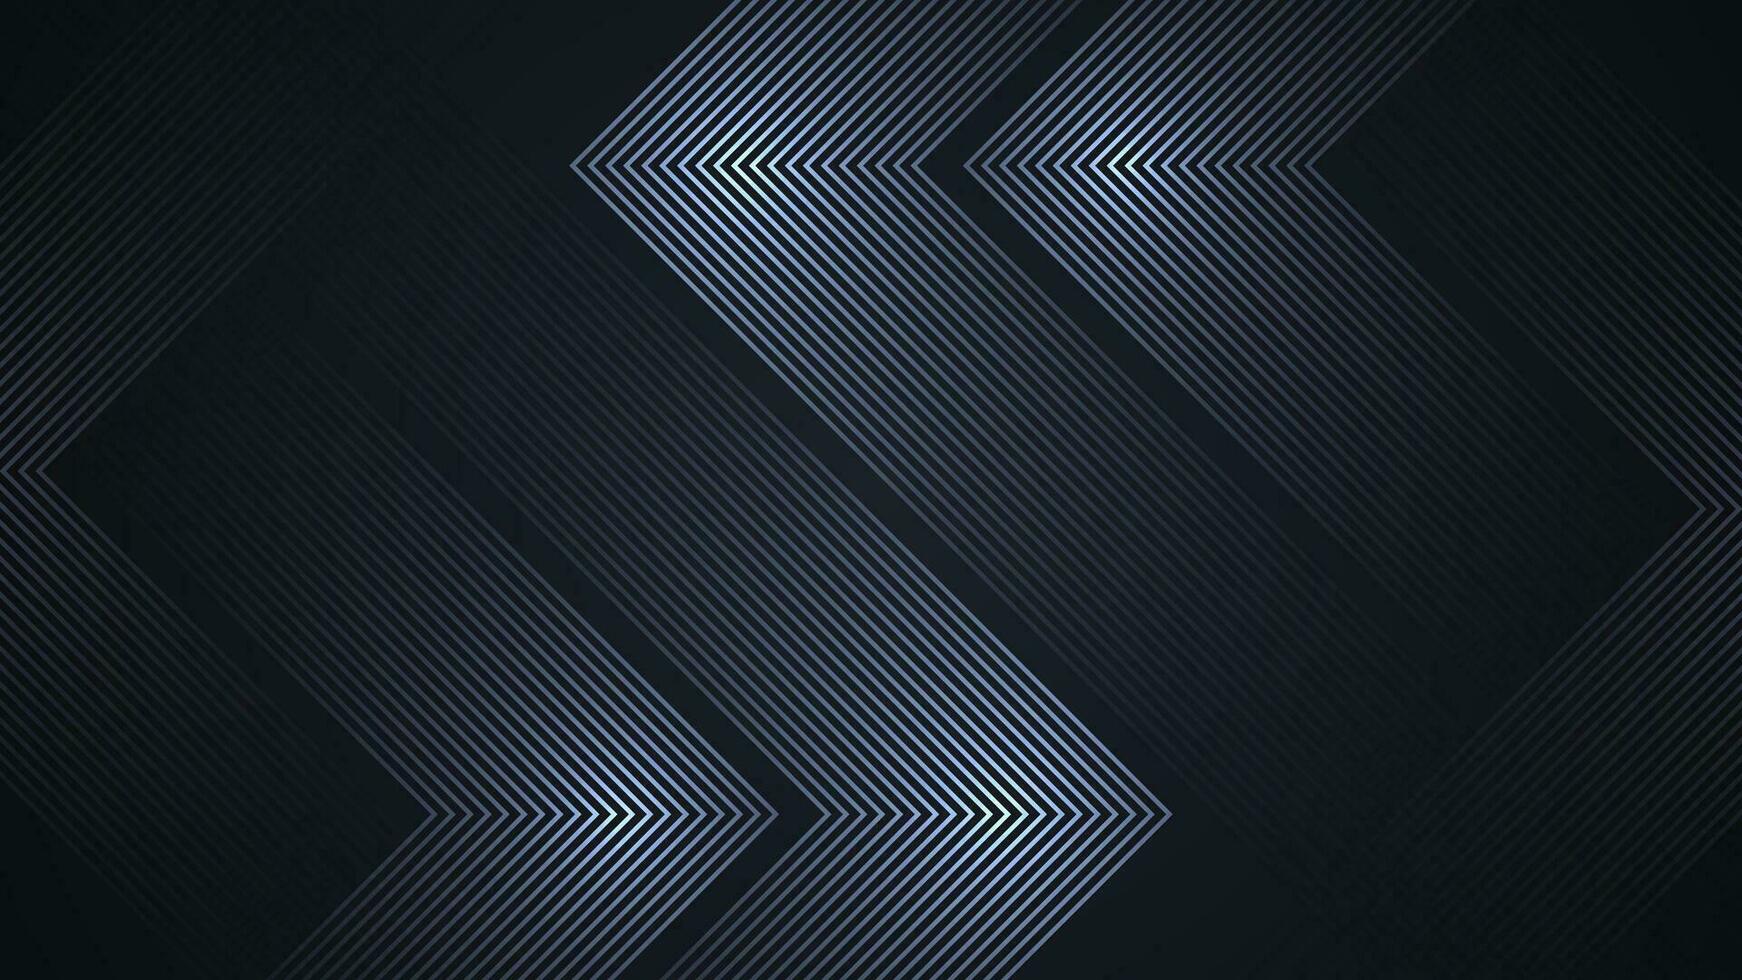 Black simple abstract background with lines in a geometric style as the main element. vector